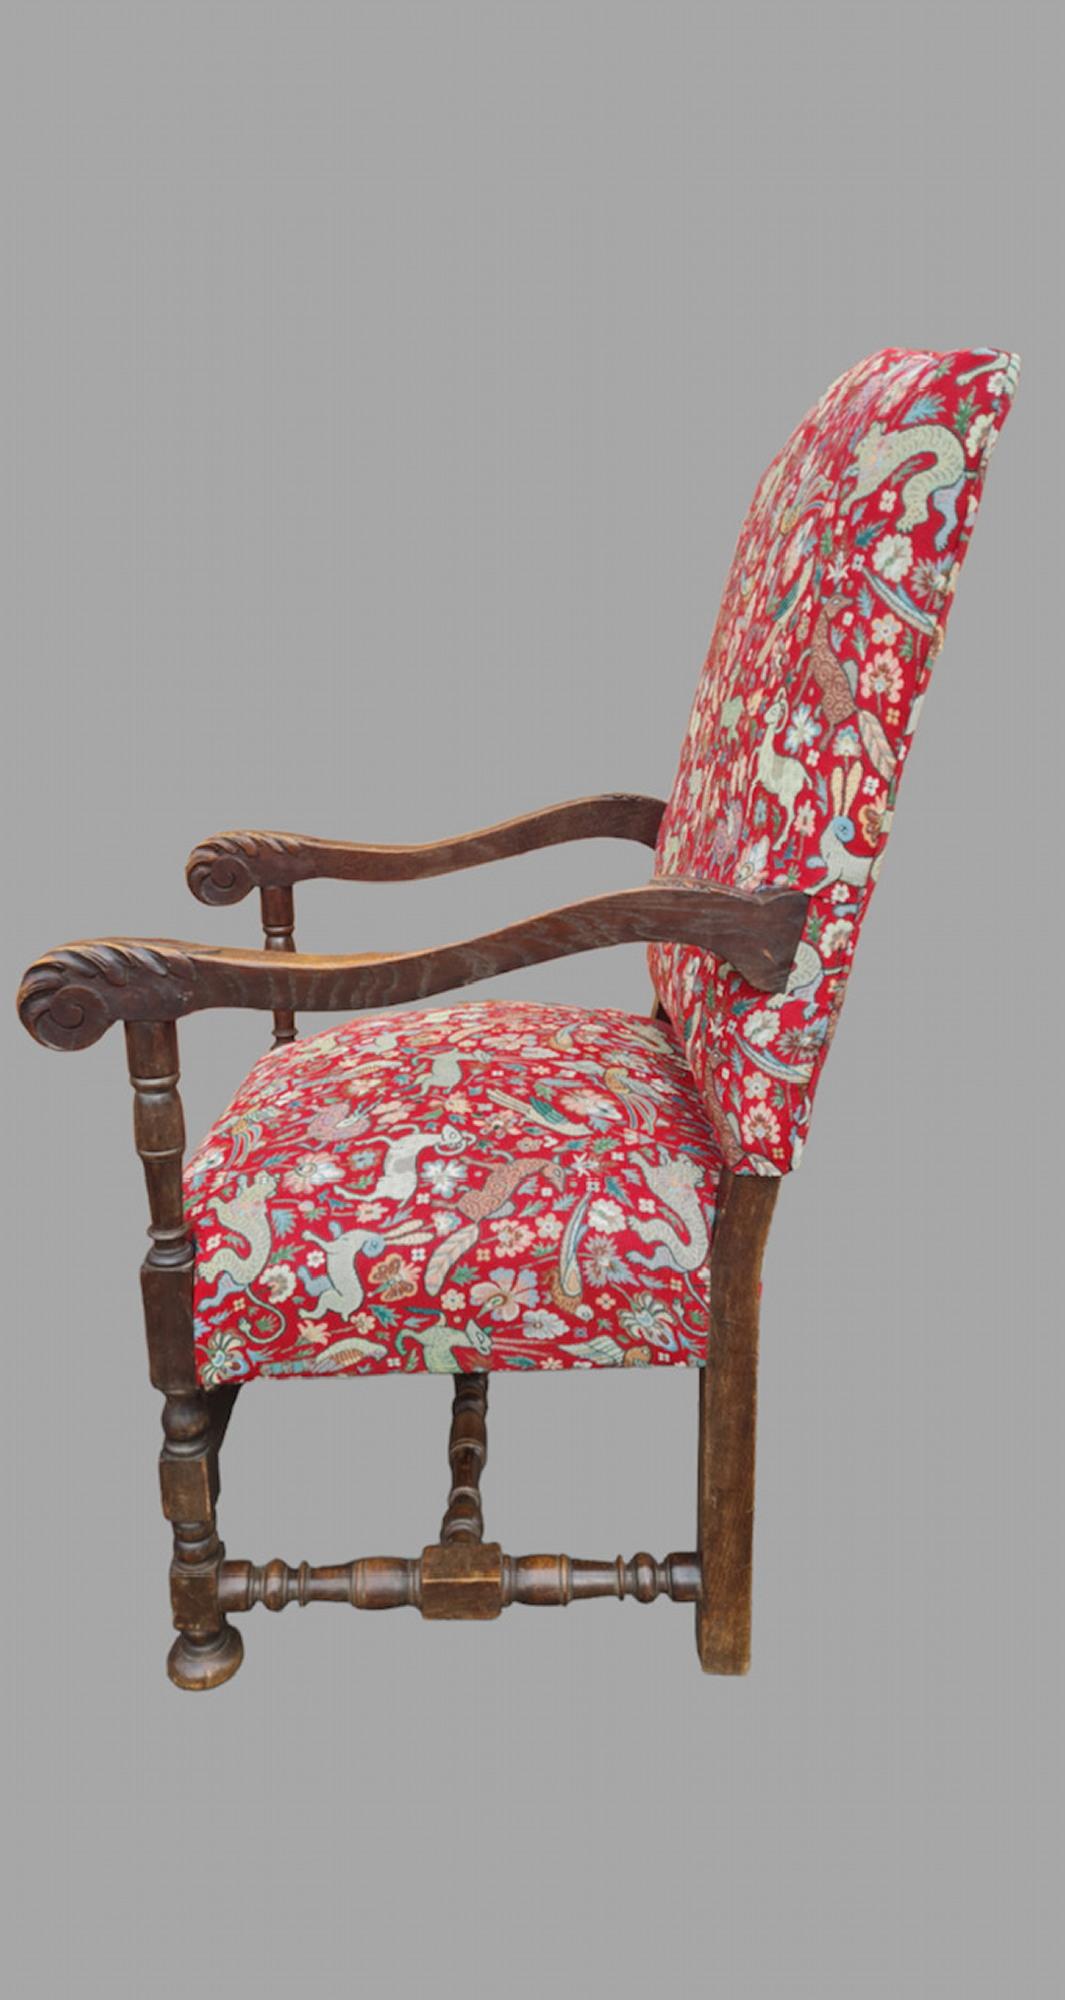 17th Century style arm chair made in the mid 1800’s. Fully restored, sprung, stuffed and covered in this fabulous woodland animal fabric.
Leaf detail arms and carved front panel.